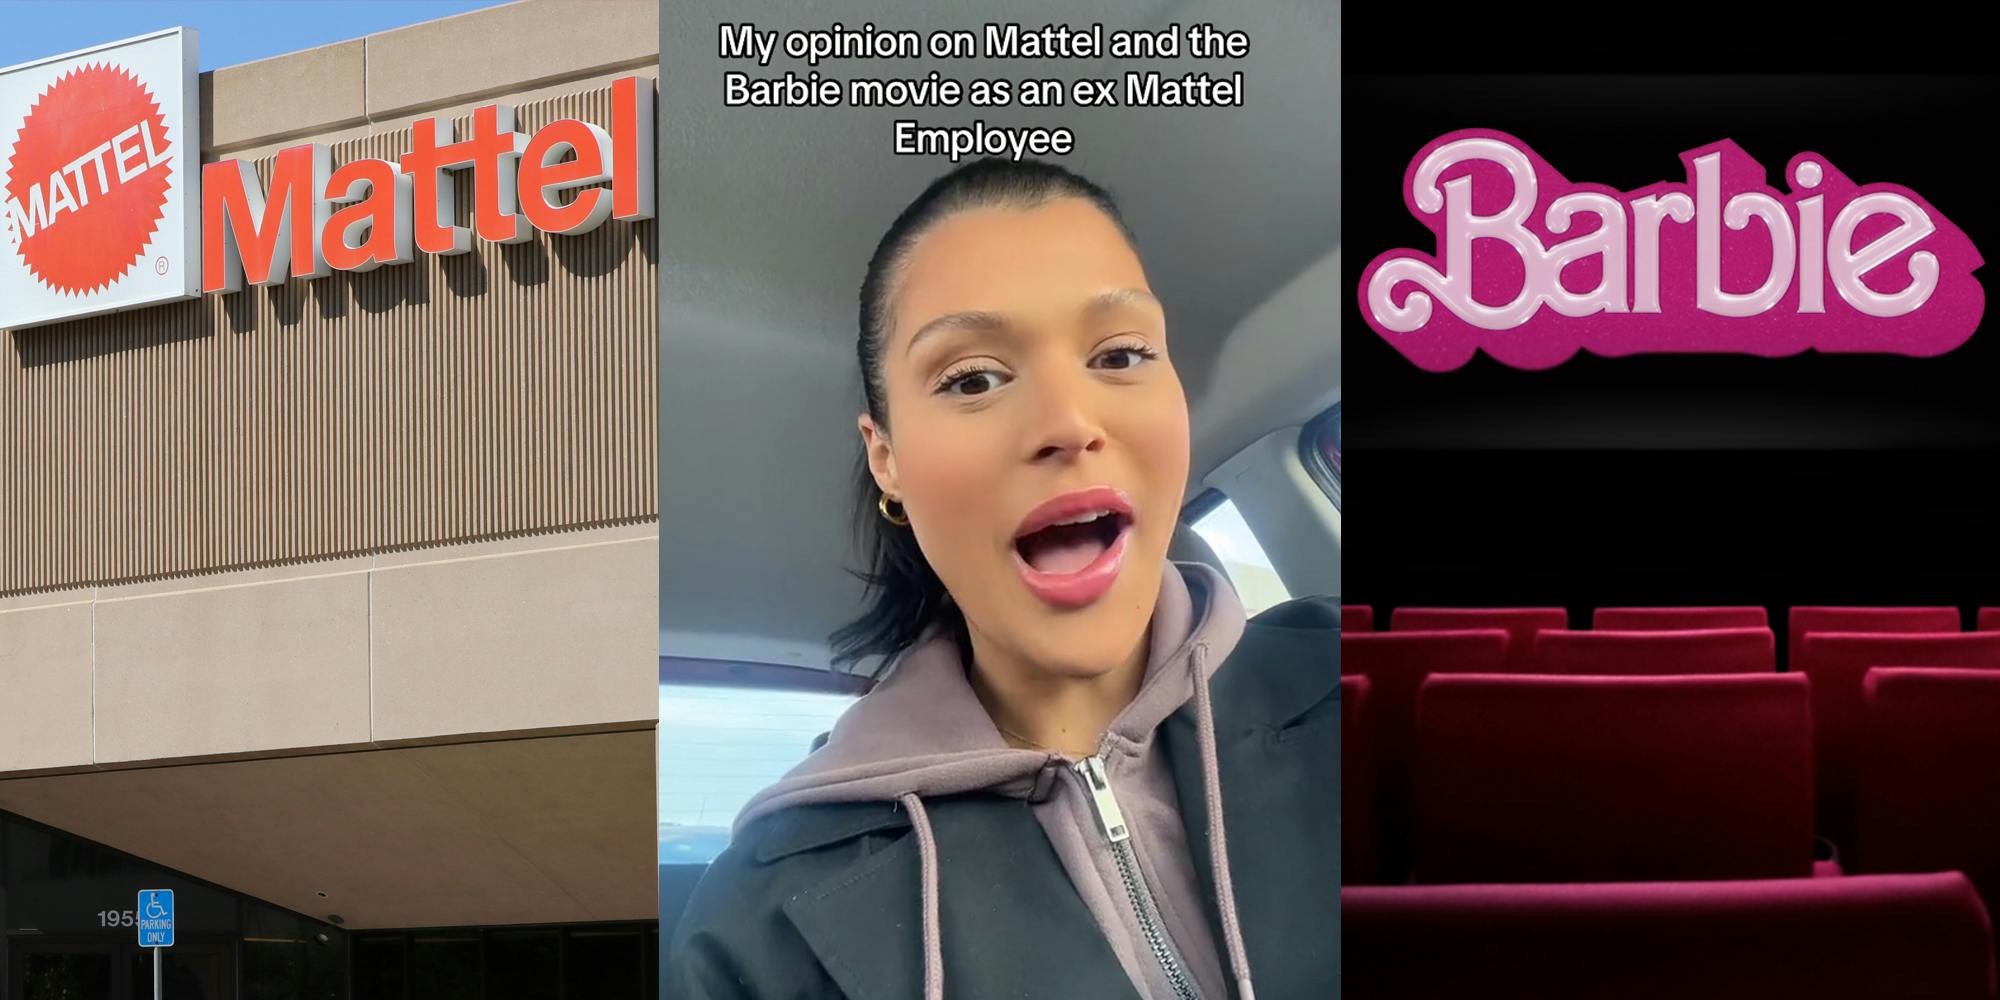 Mattel logo on building (l) former Mattel employee speaking in car with caption "My opinion on Mattel and the Barbie movie as an ex Mattel Employee" (c) Barbie movie on theatre screen with movie theatre seats (r)